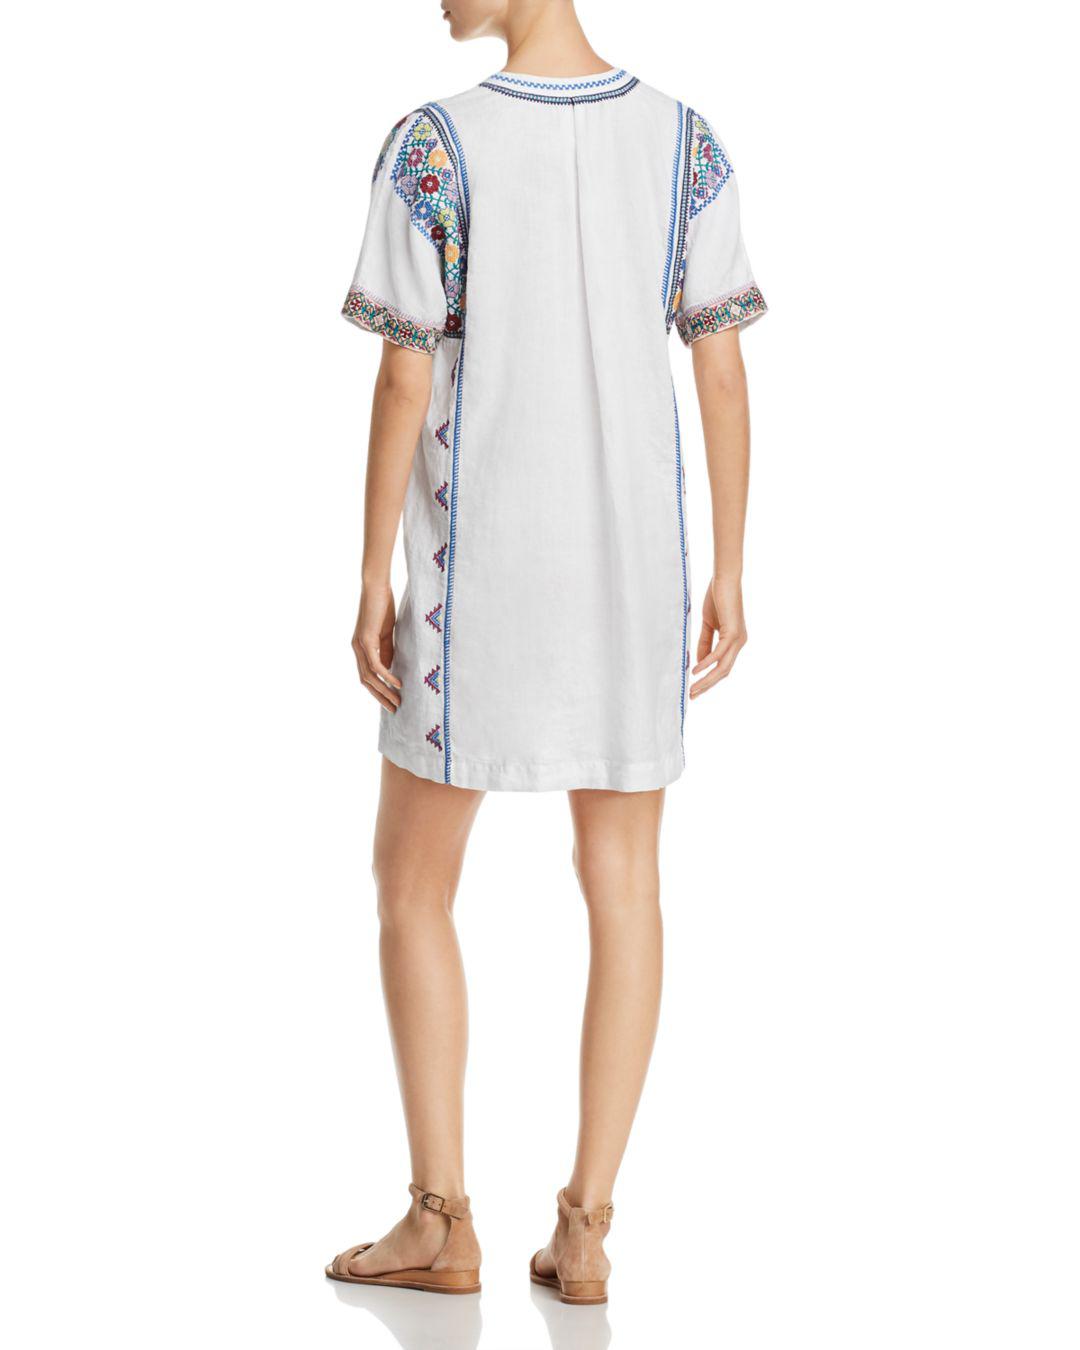 Johnny Was Clover Embroidered Tunic Dress in White - Lyst